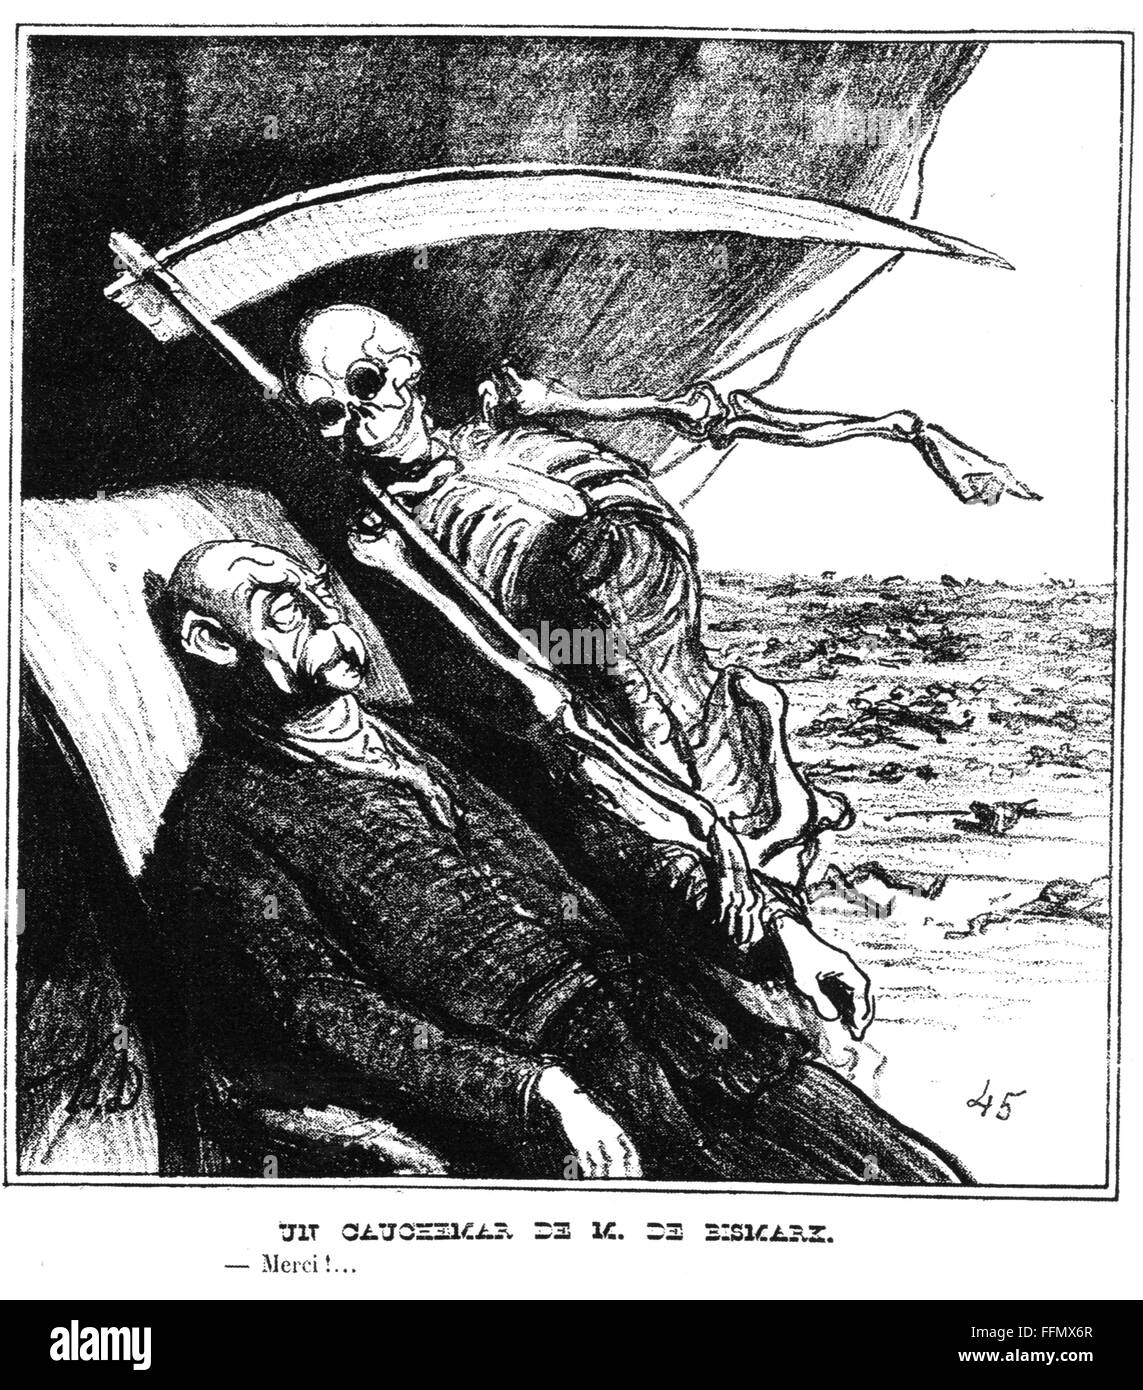 Franco-Prussian War 1870 - 1871, caricature, death thanks Otto von Bismarck for the rich harvest, 'A Nightmare of Mr. von Bismarck', drawing, 'Actualités', Paris, 22.8.1870, Additional-Rights-Clearences-Not Available Stock Photo